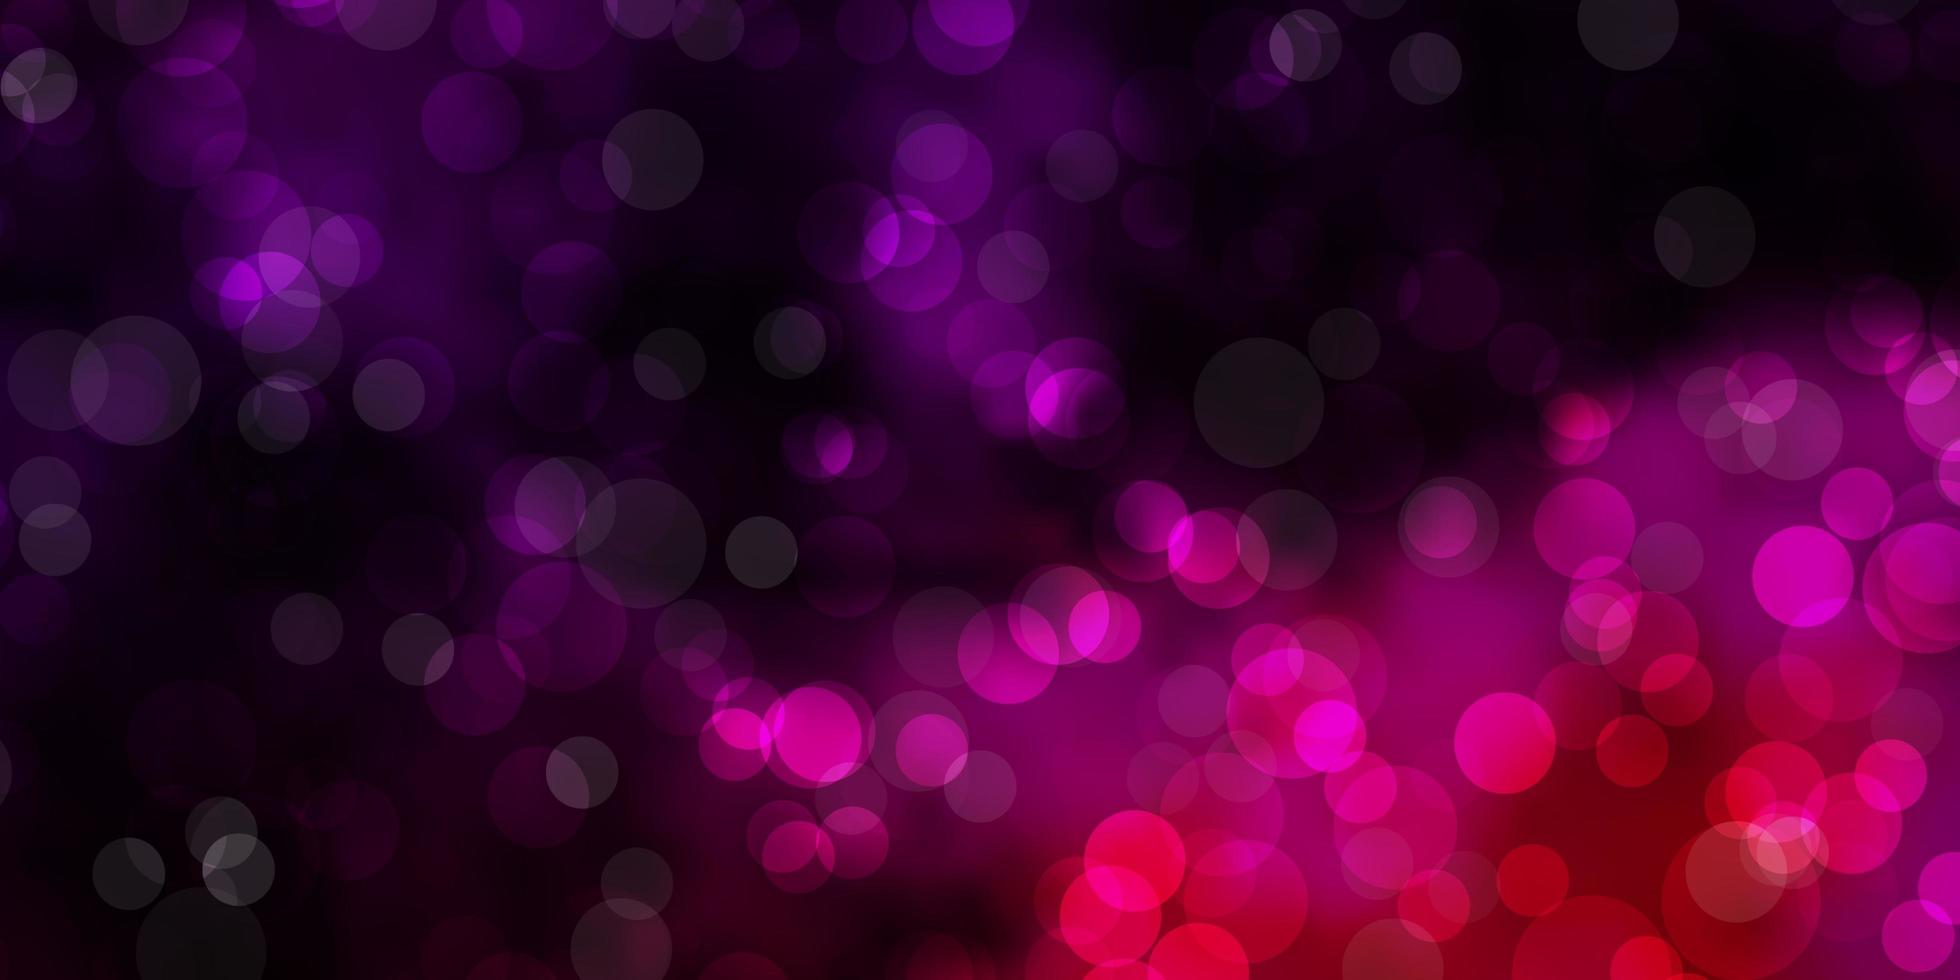 Dark Purple Pink vector background with spots Abstract colorful disks on simple gradient background Design for posters banners